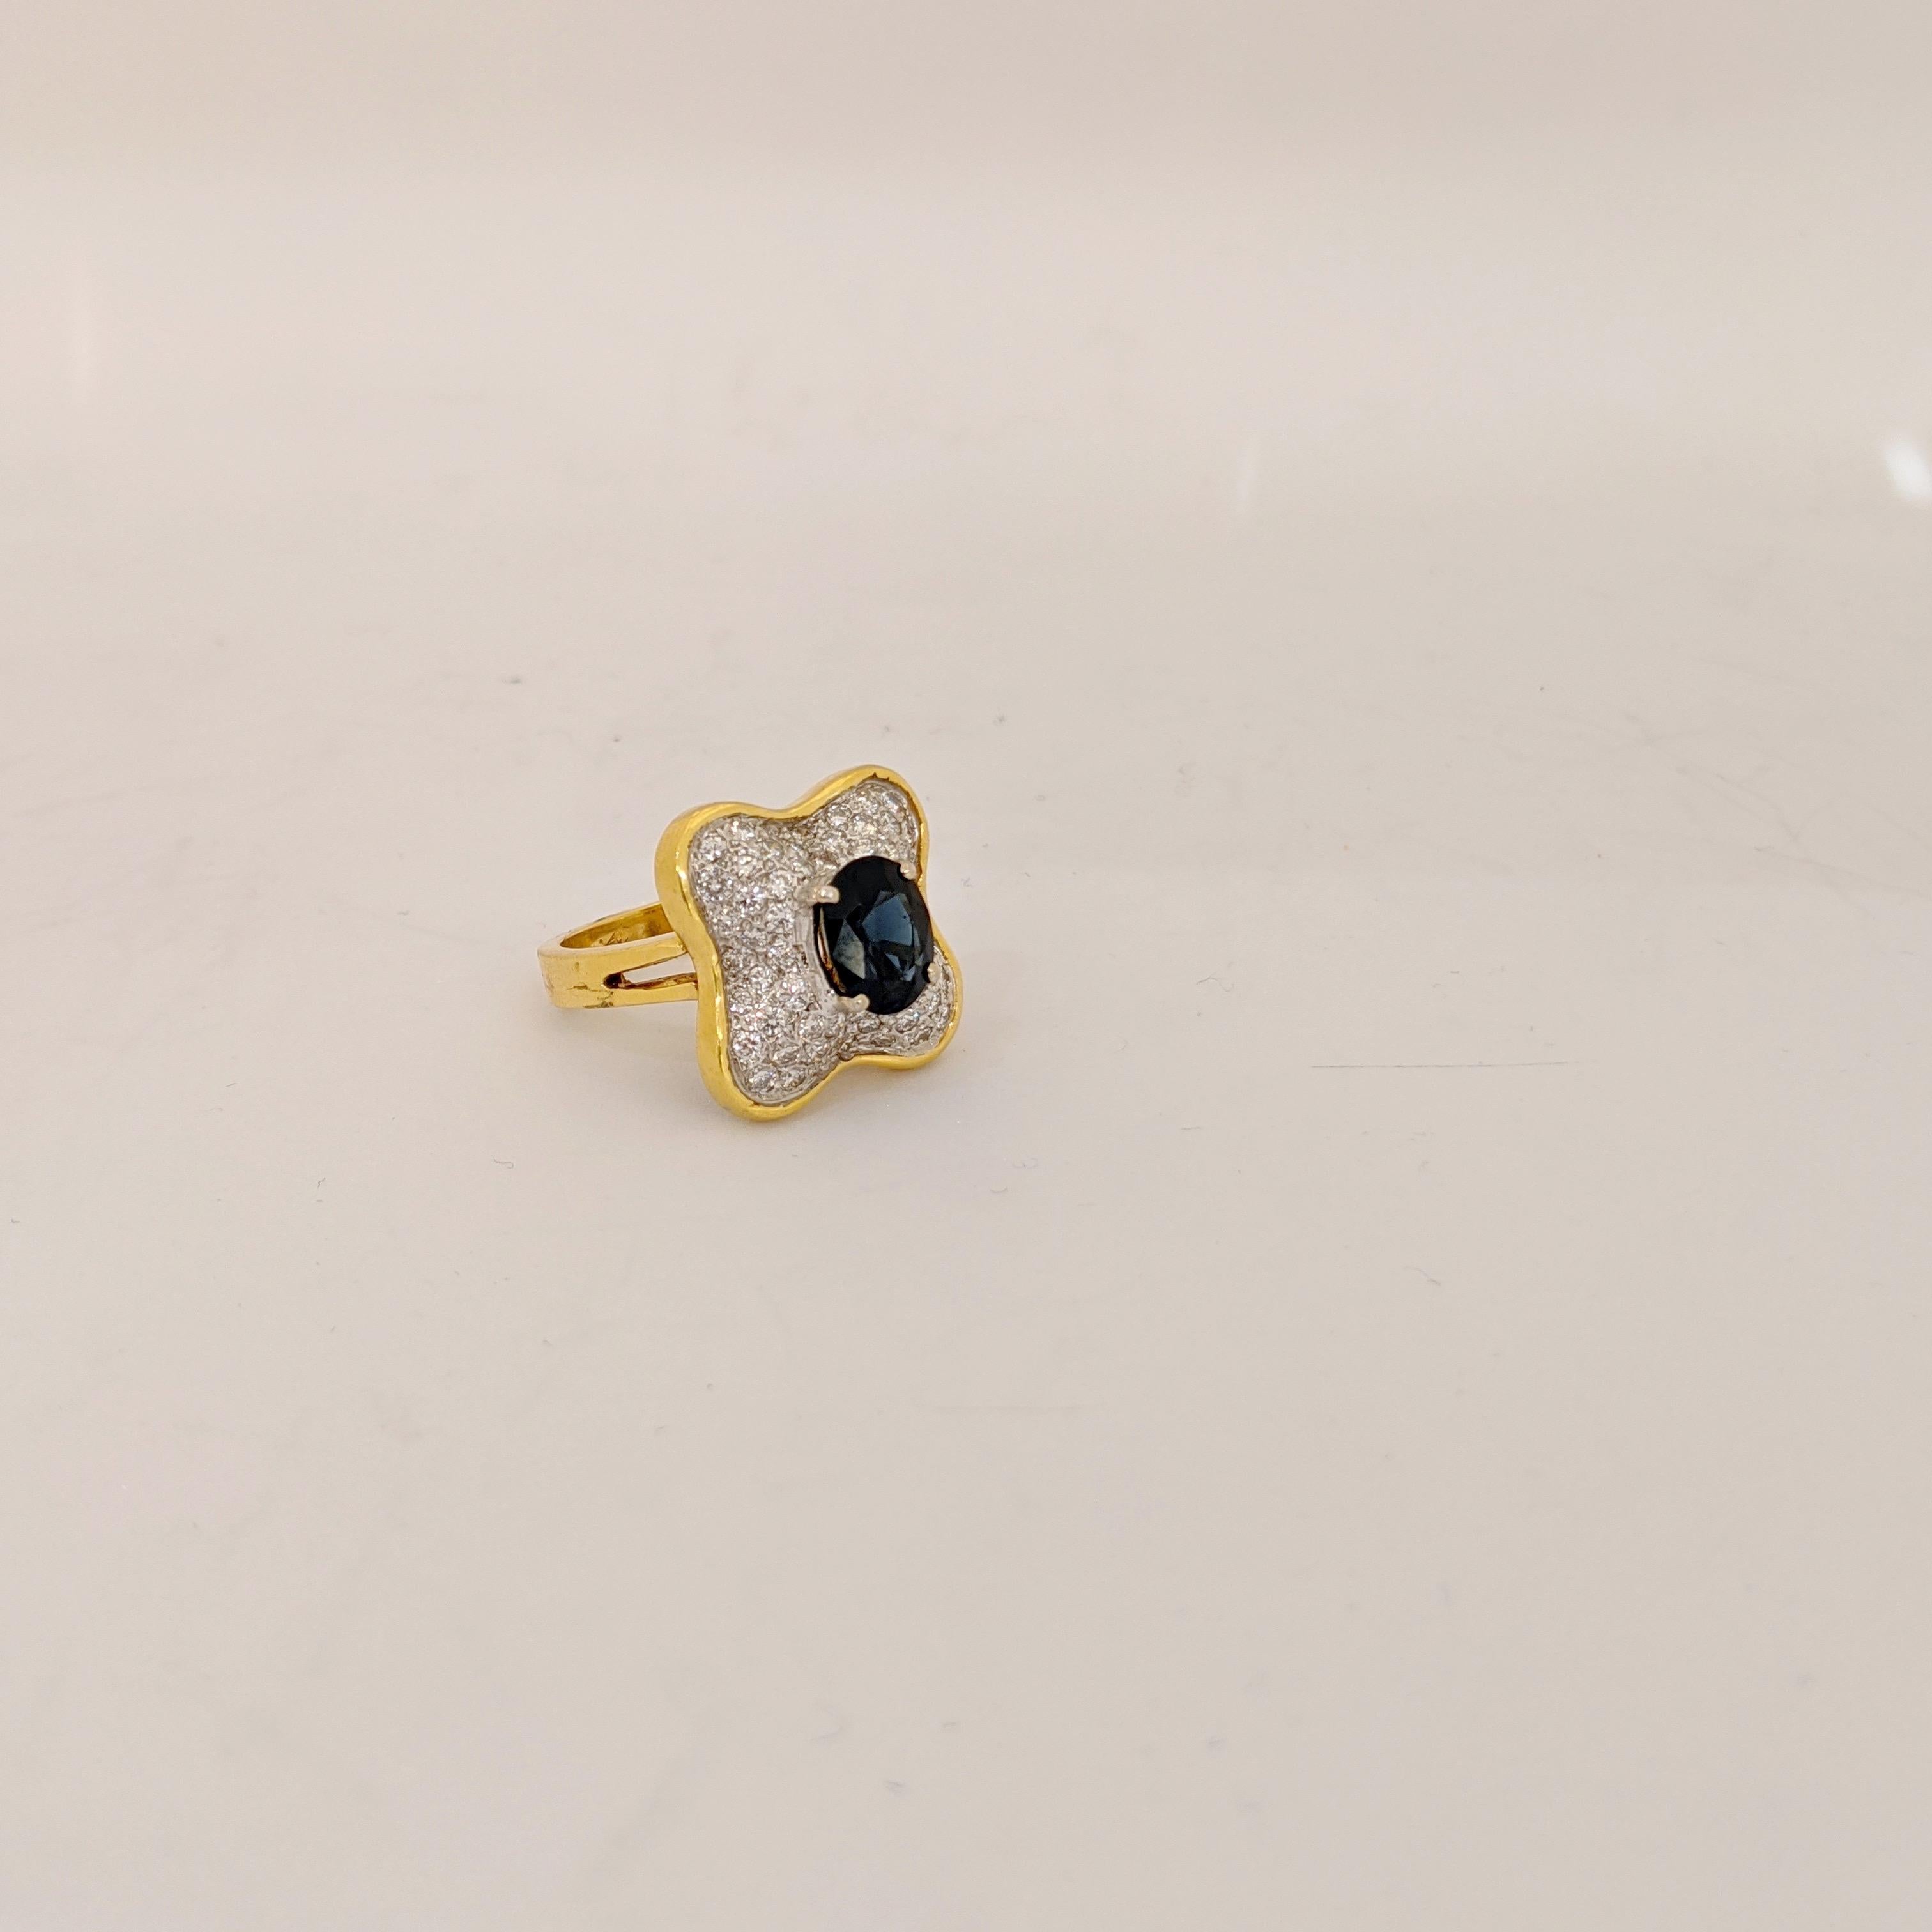 Vintage Honora 1980, 18 karat yellow gold ring. Clover shape set with 1.02 carats of  pave round brilliant Diamonds and a 2.27 carat oval Blue Sapphire.
Ring size 6.25   Sizing options are available
Stamped 18K  H